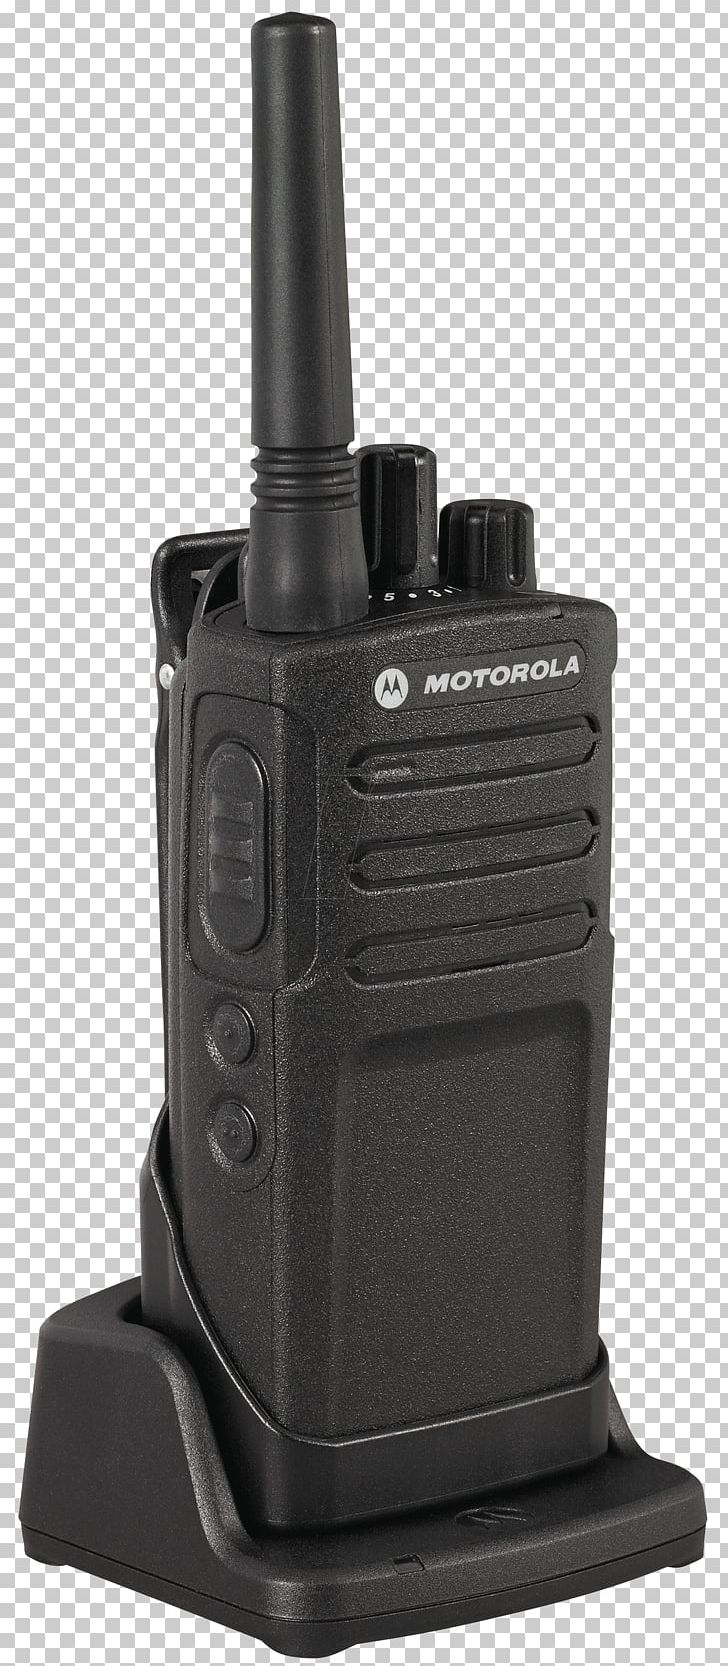 Microphone PMR446 Walkie-talkie Two-way Radio Motorola Two Way PNG, Clipart, Communication Device, Electronic Device, Electronics, Gfunk Vibez Radio, Microphone Free PNG Download